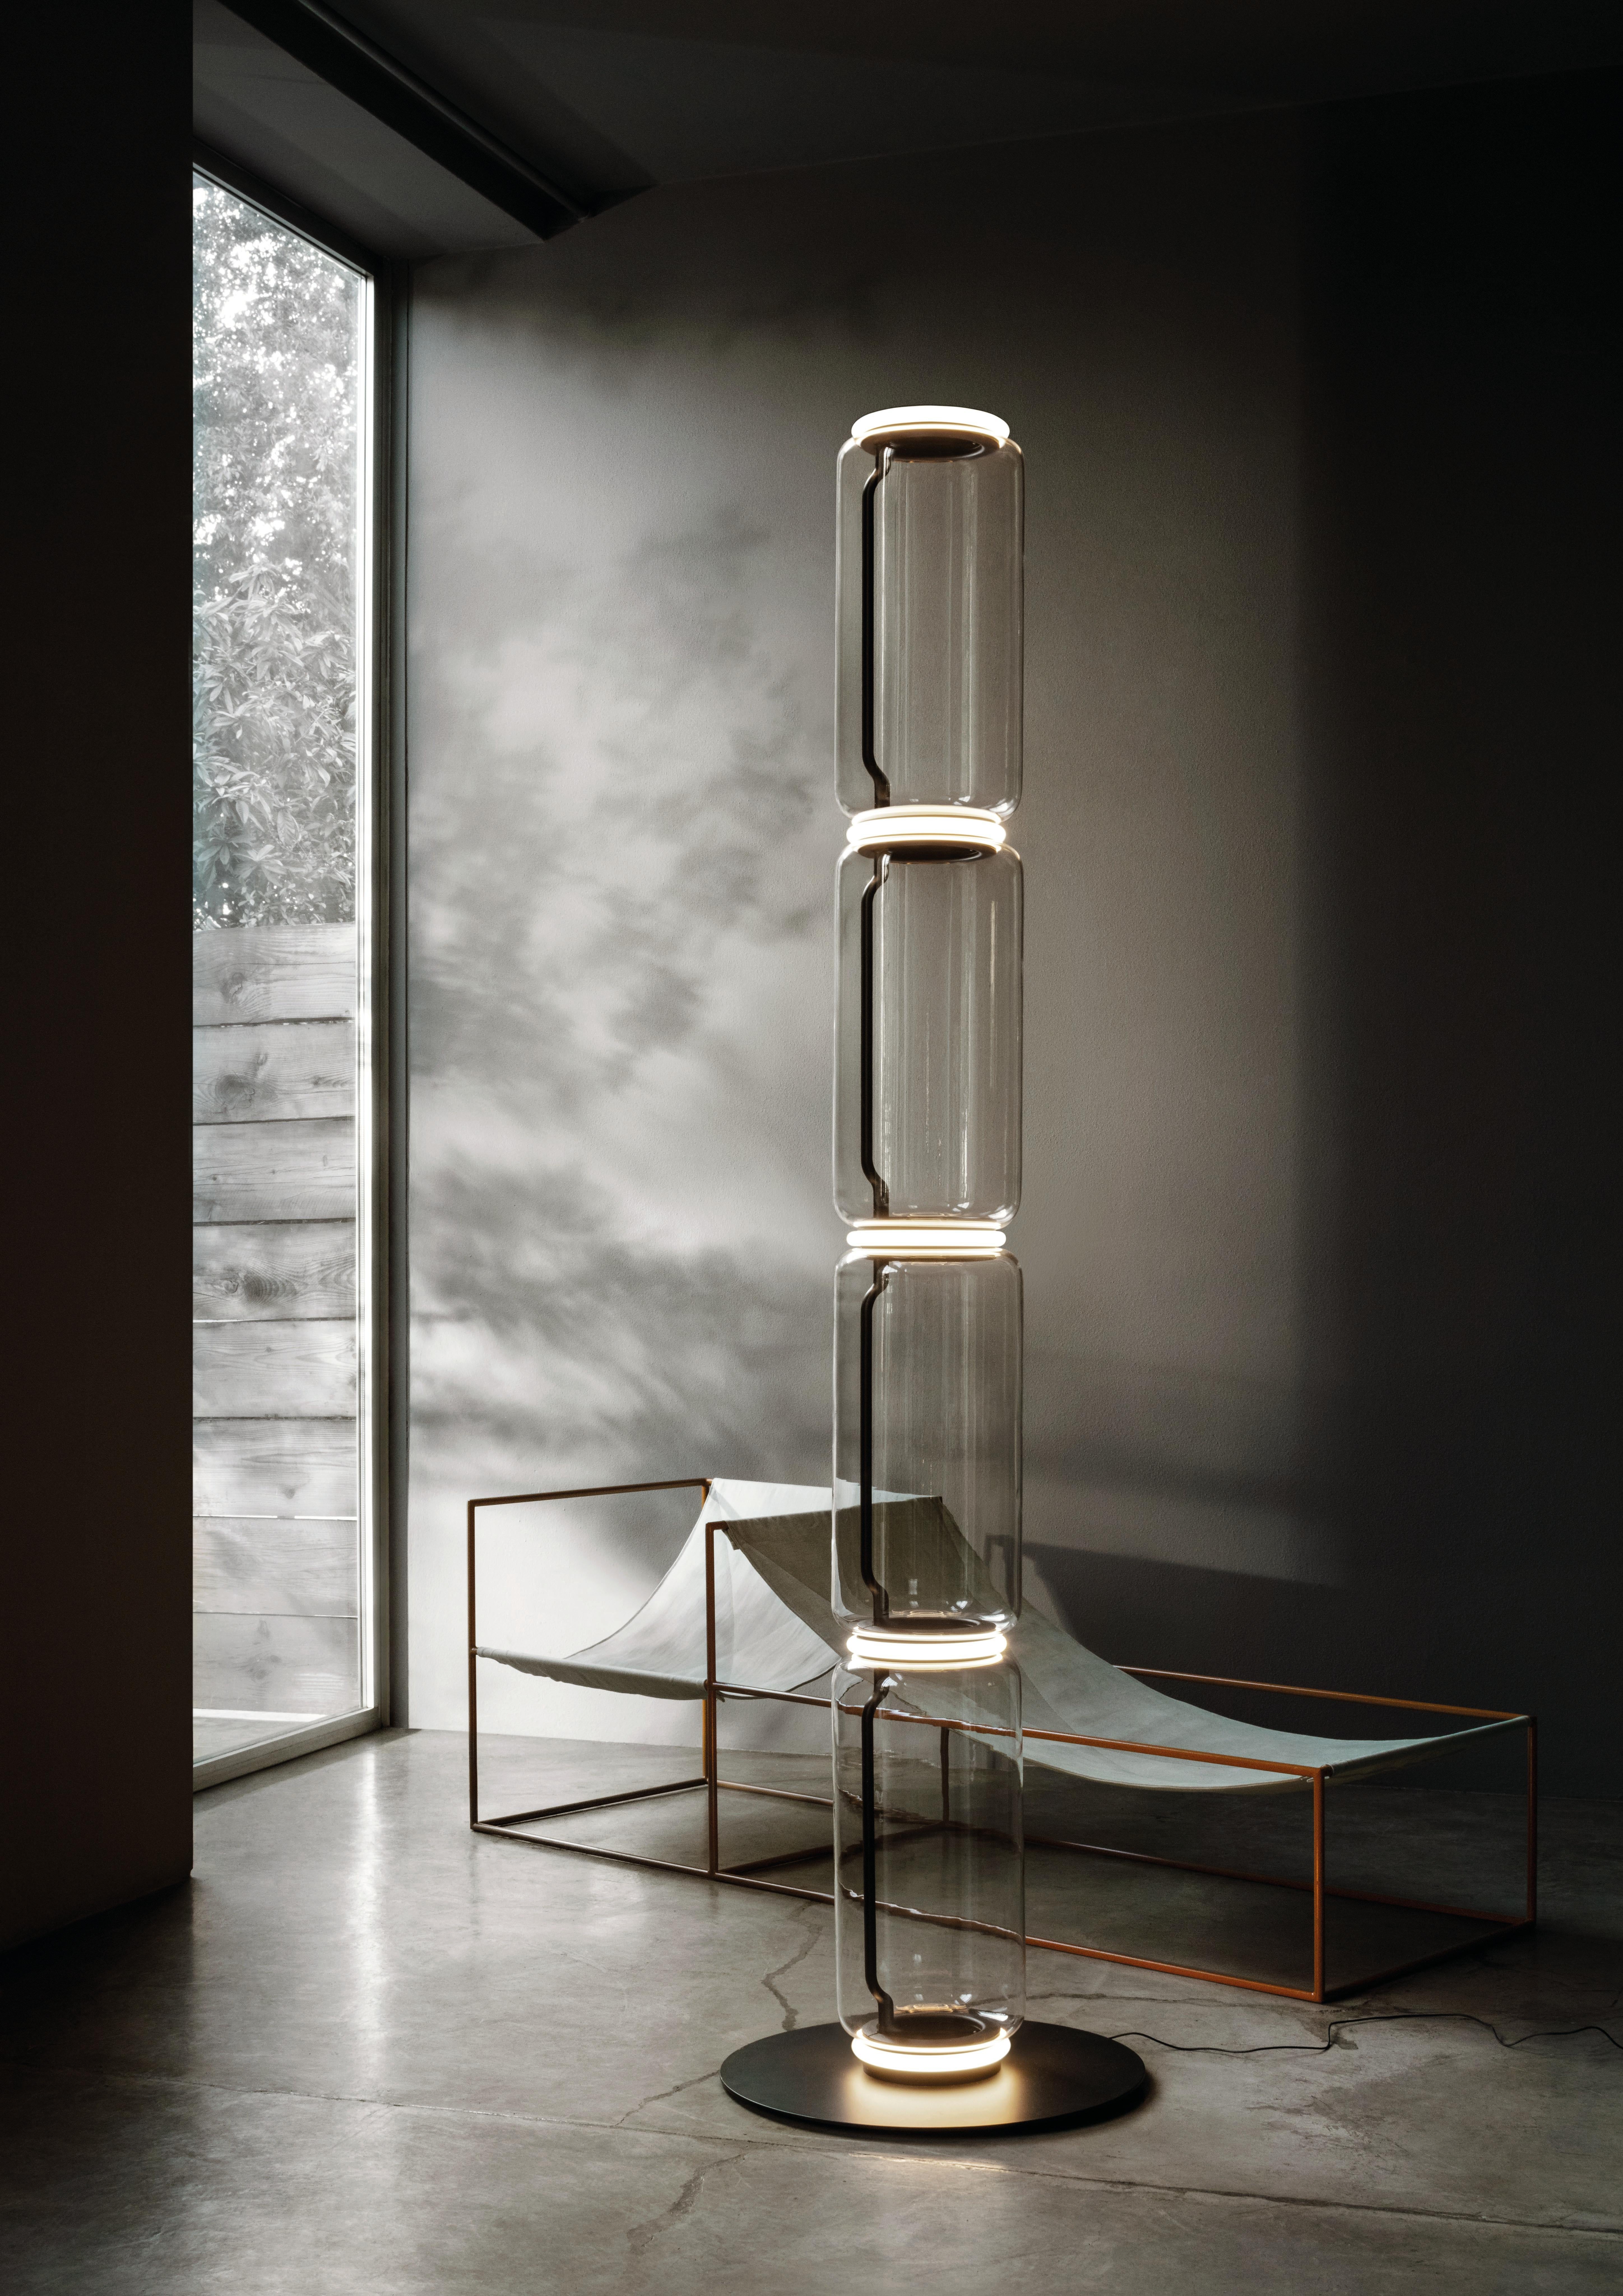 The brainchild of master designer Konstantin Grcic, Noctambule by Flos is a futuristic lighting system that blends innovation, efficiency and aesthetics. Its transparent hand blown glass cylinder is surrounded by discrete LED technology on top and